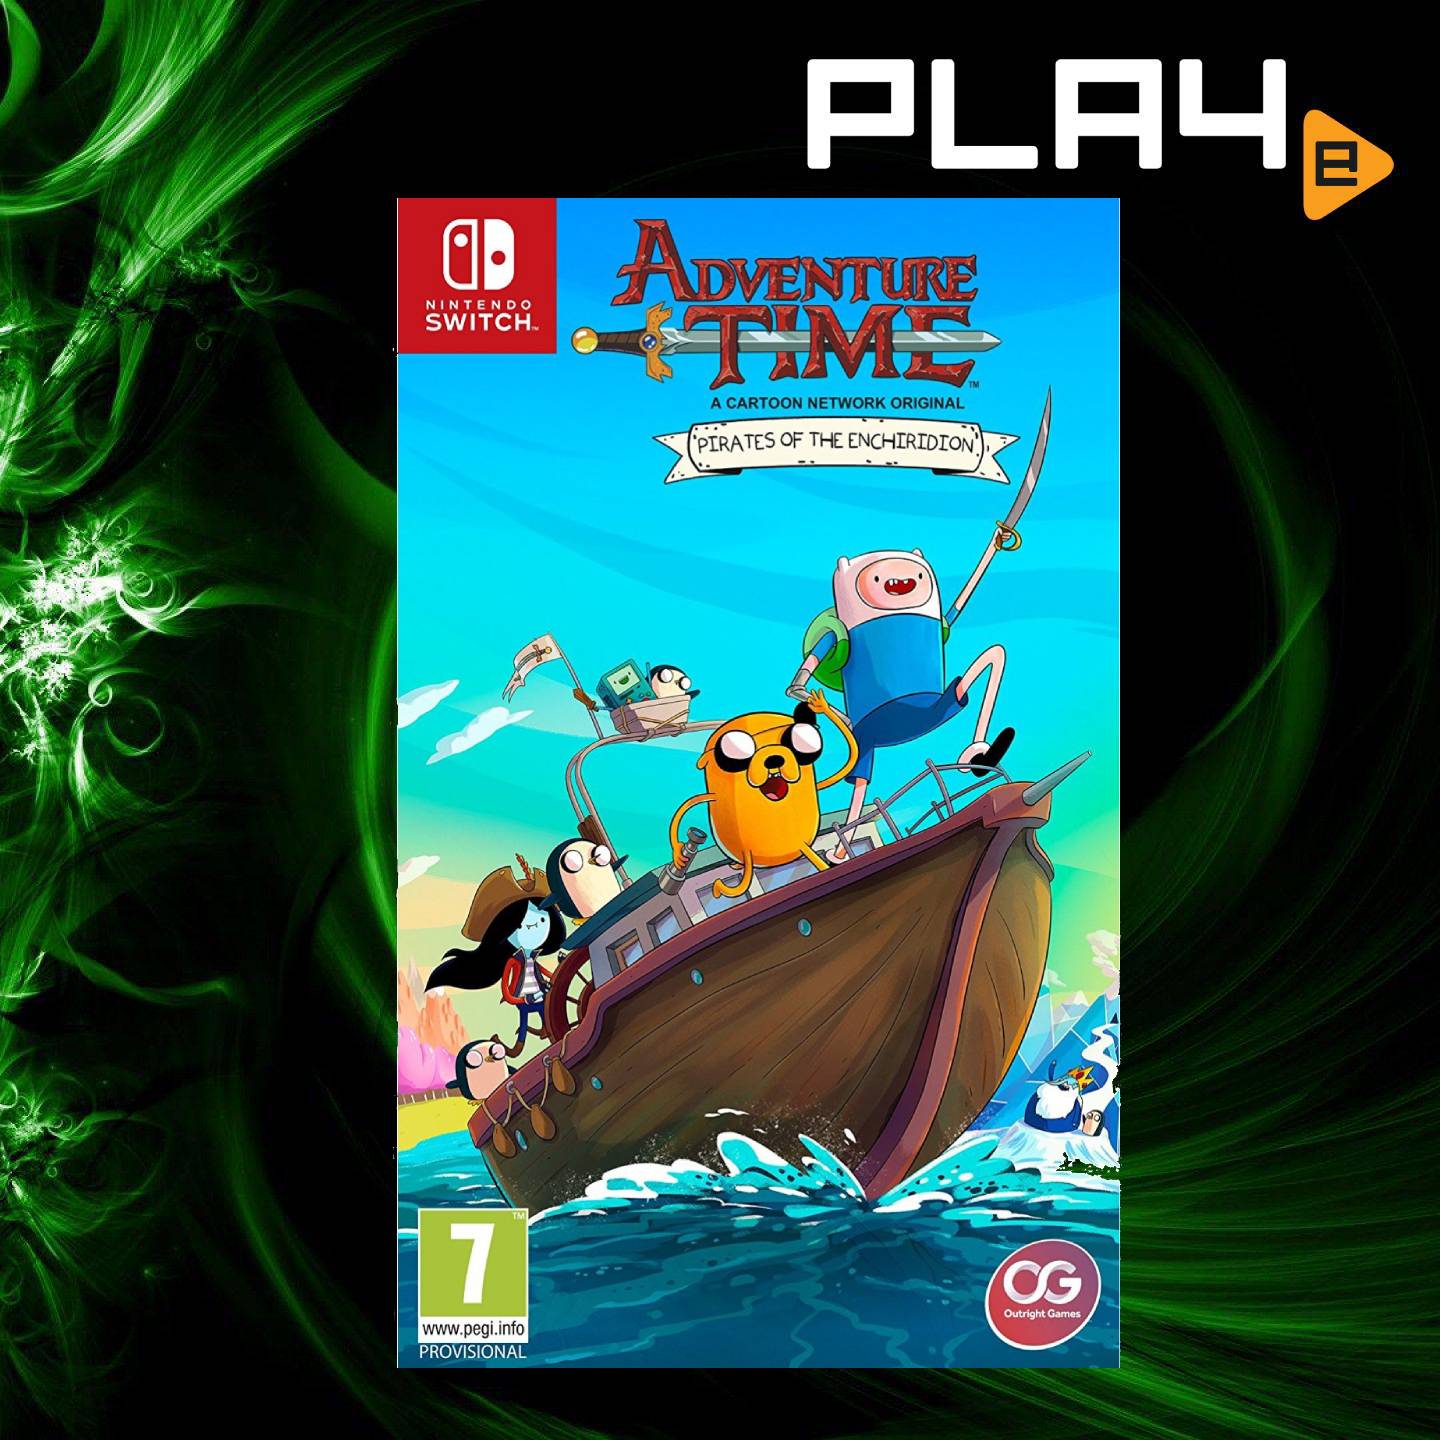 Adventure Time: Pirates of the Enchiridion for Nintendo Switch